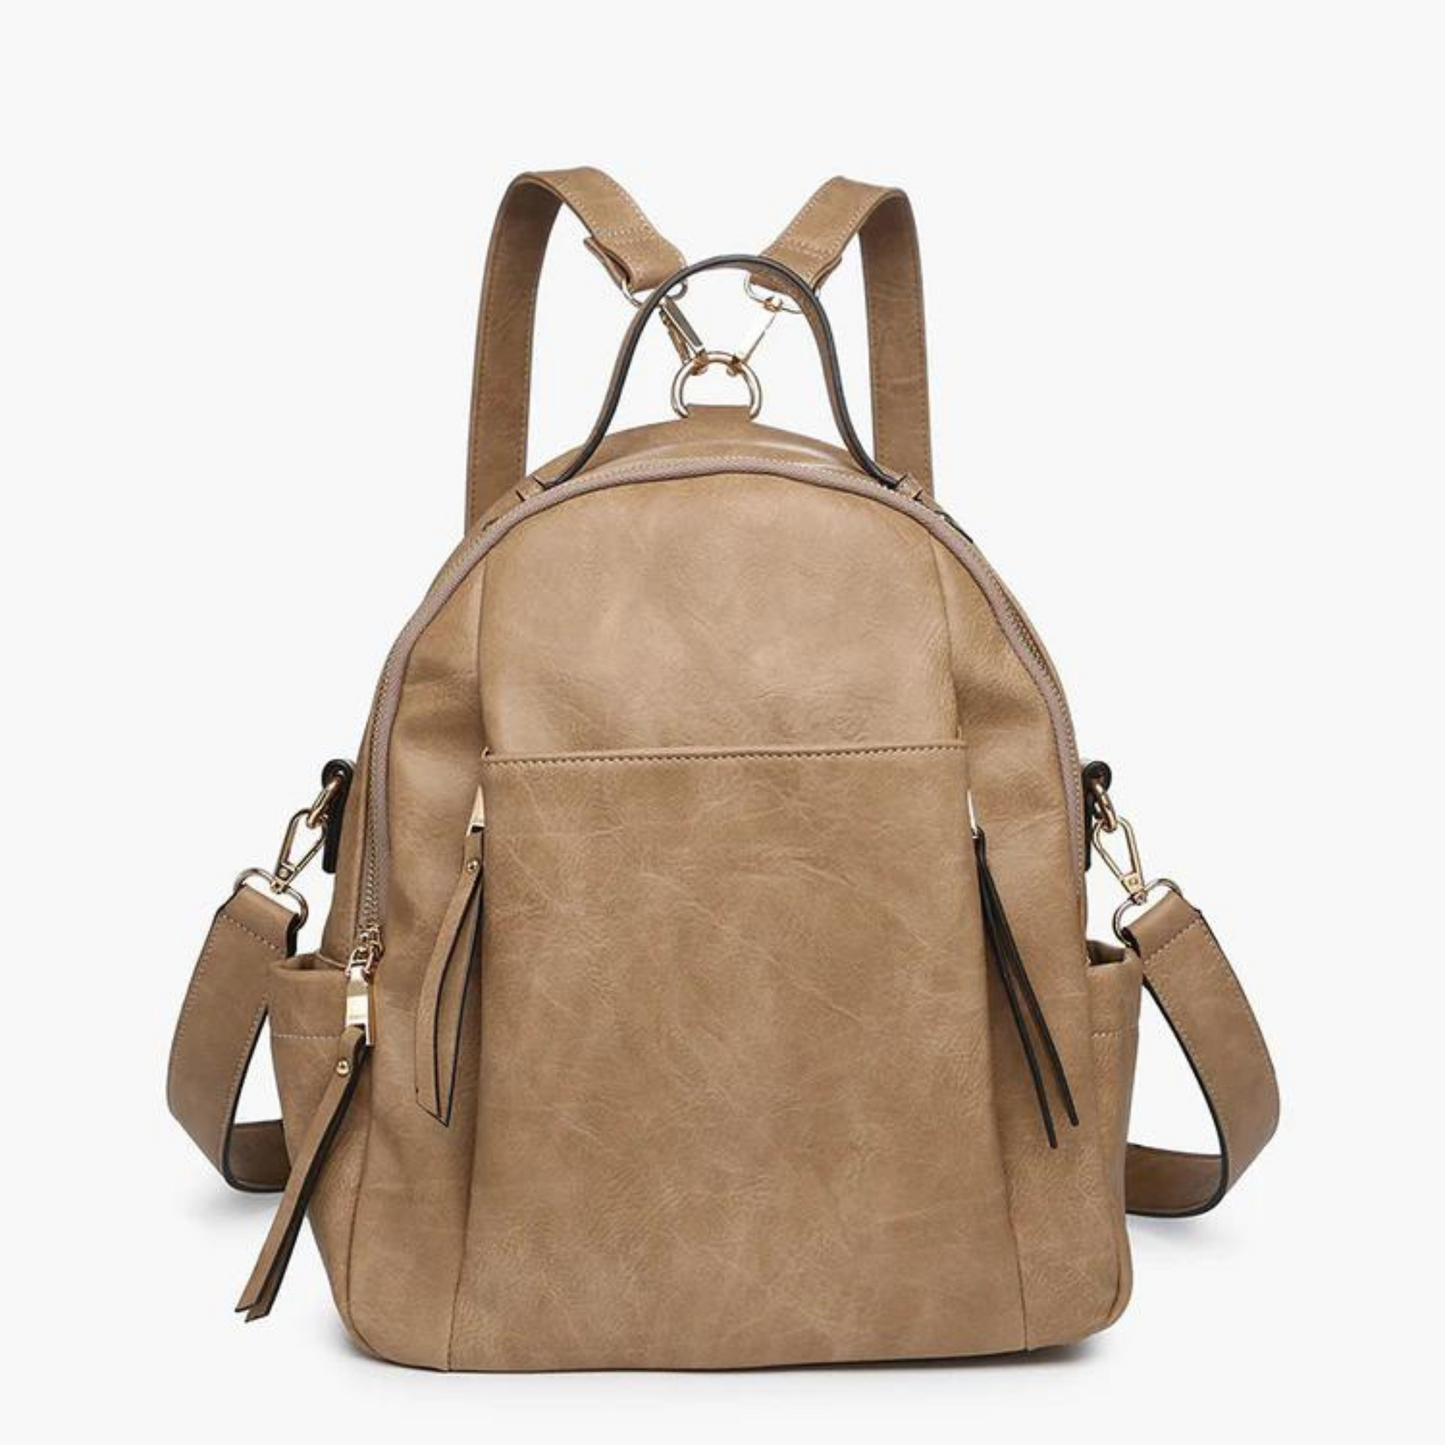 Taupe color Lillia backpack